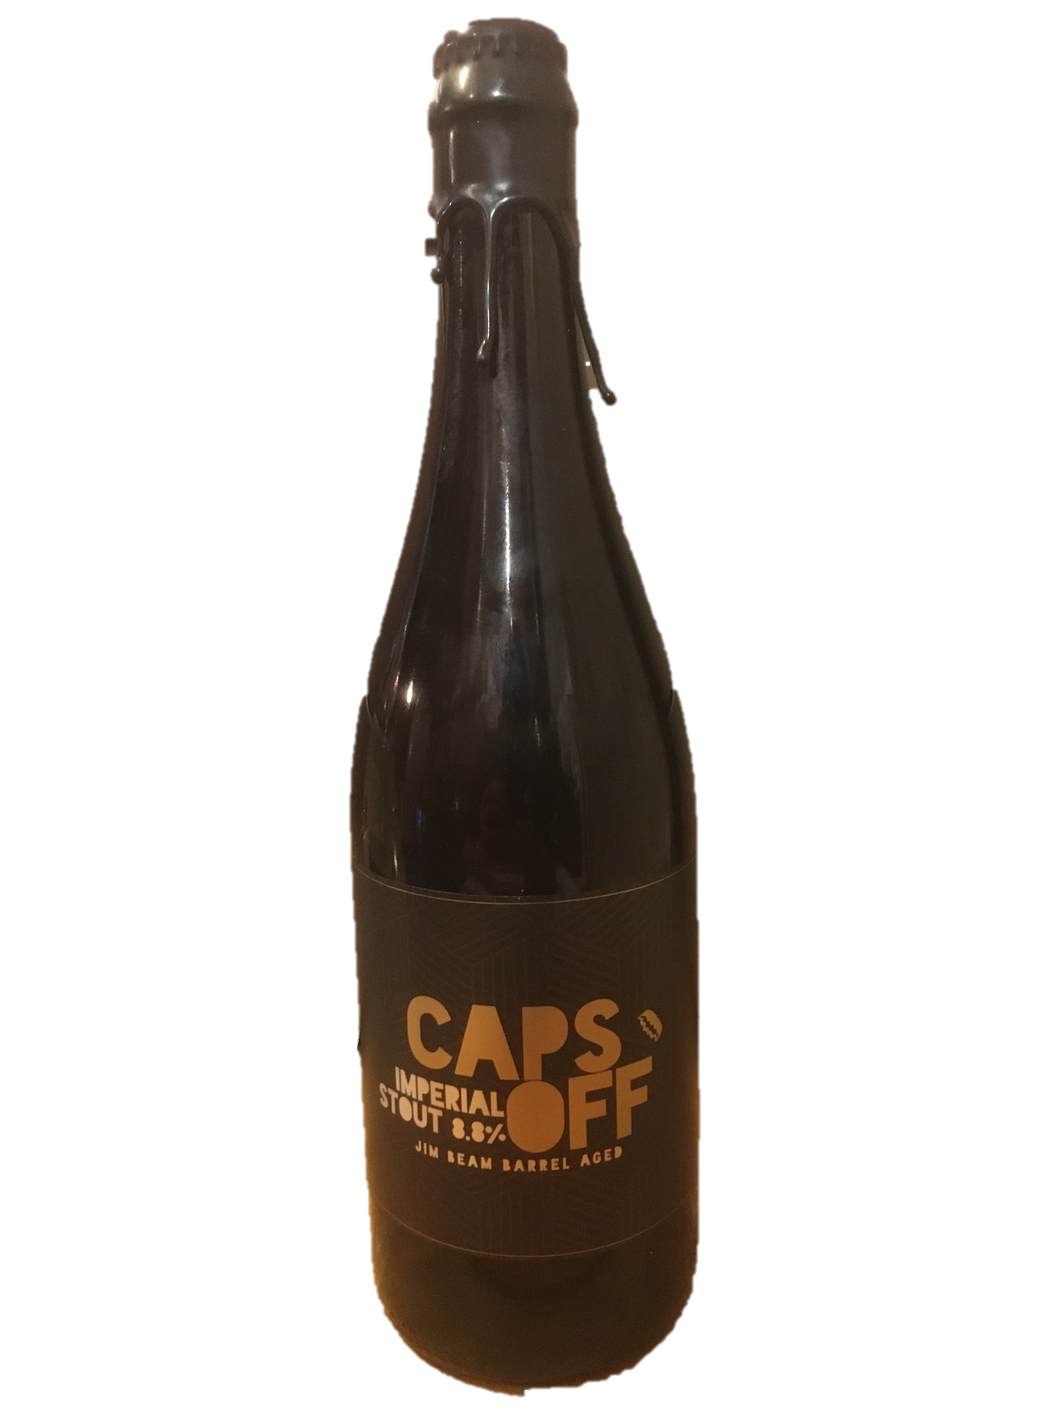 Caps Off - Imperial Stout Jim Beam Barrel Aged - 8.8% - 750ml